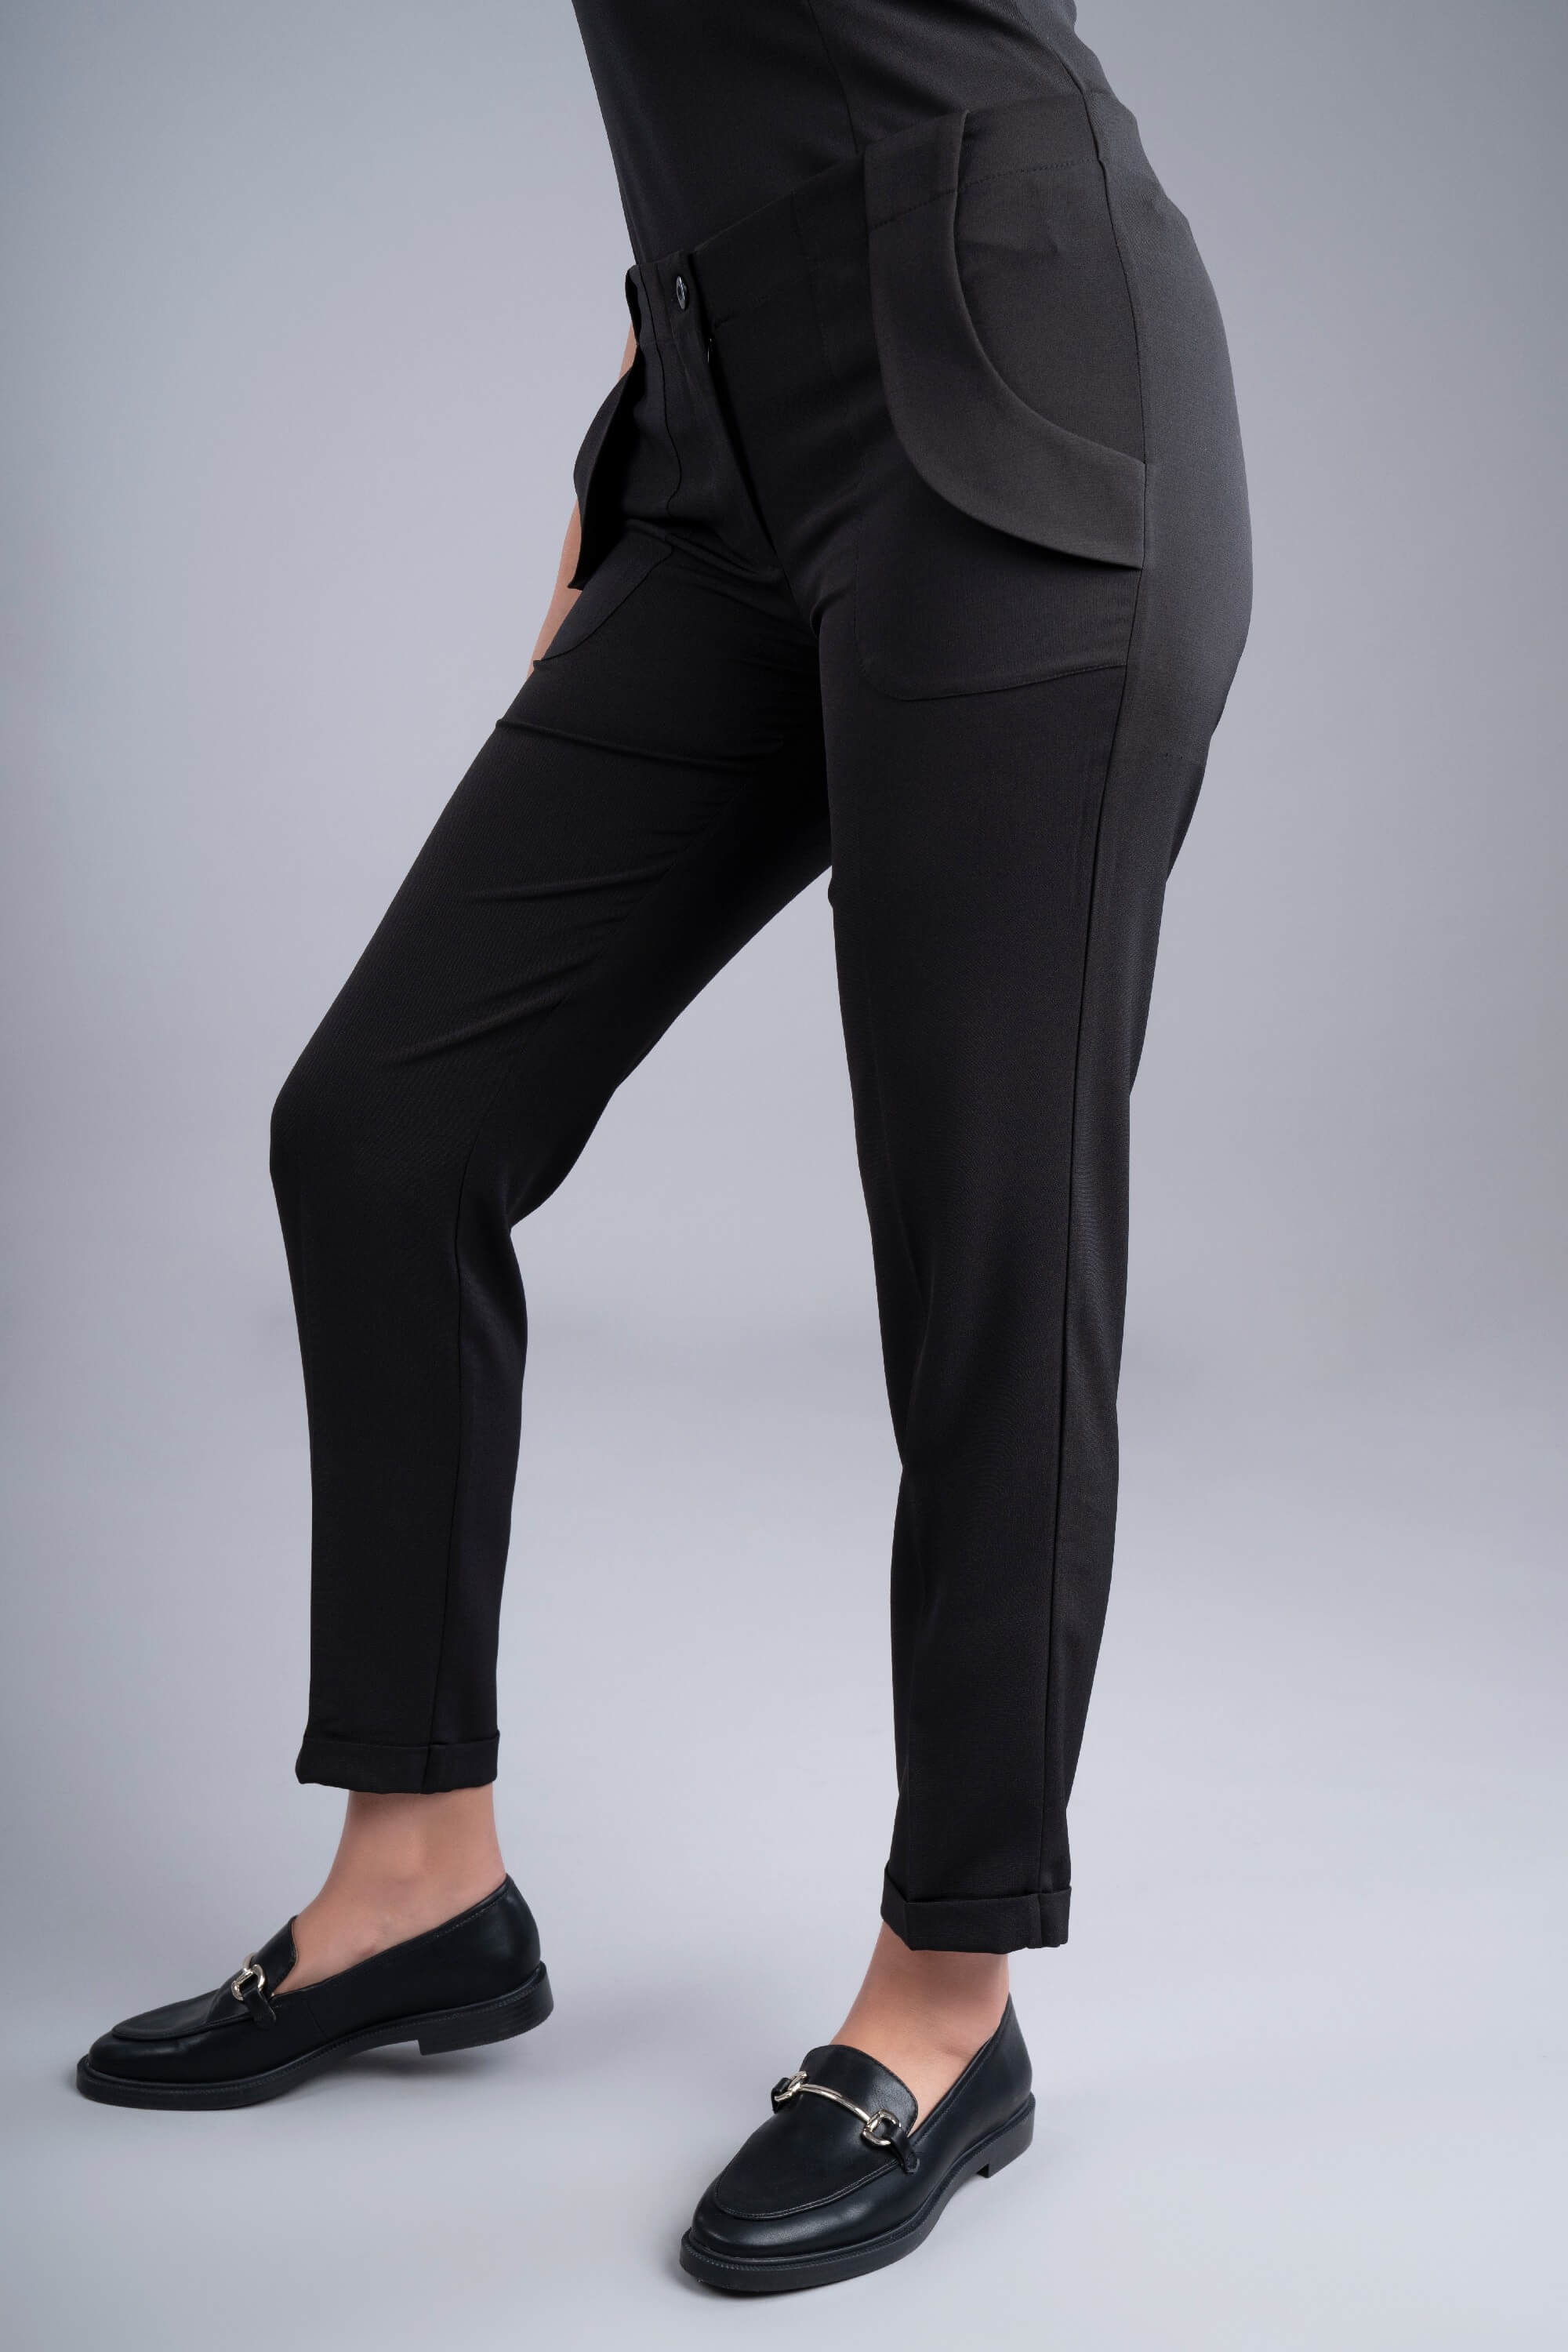 Beauly Slim Fit Trousers with Flap Pockets-Black - The Modernest